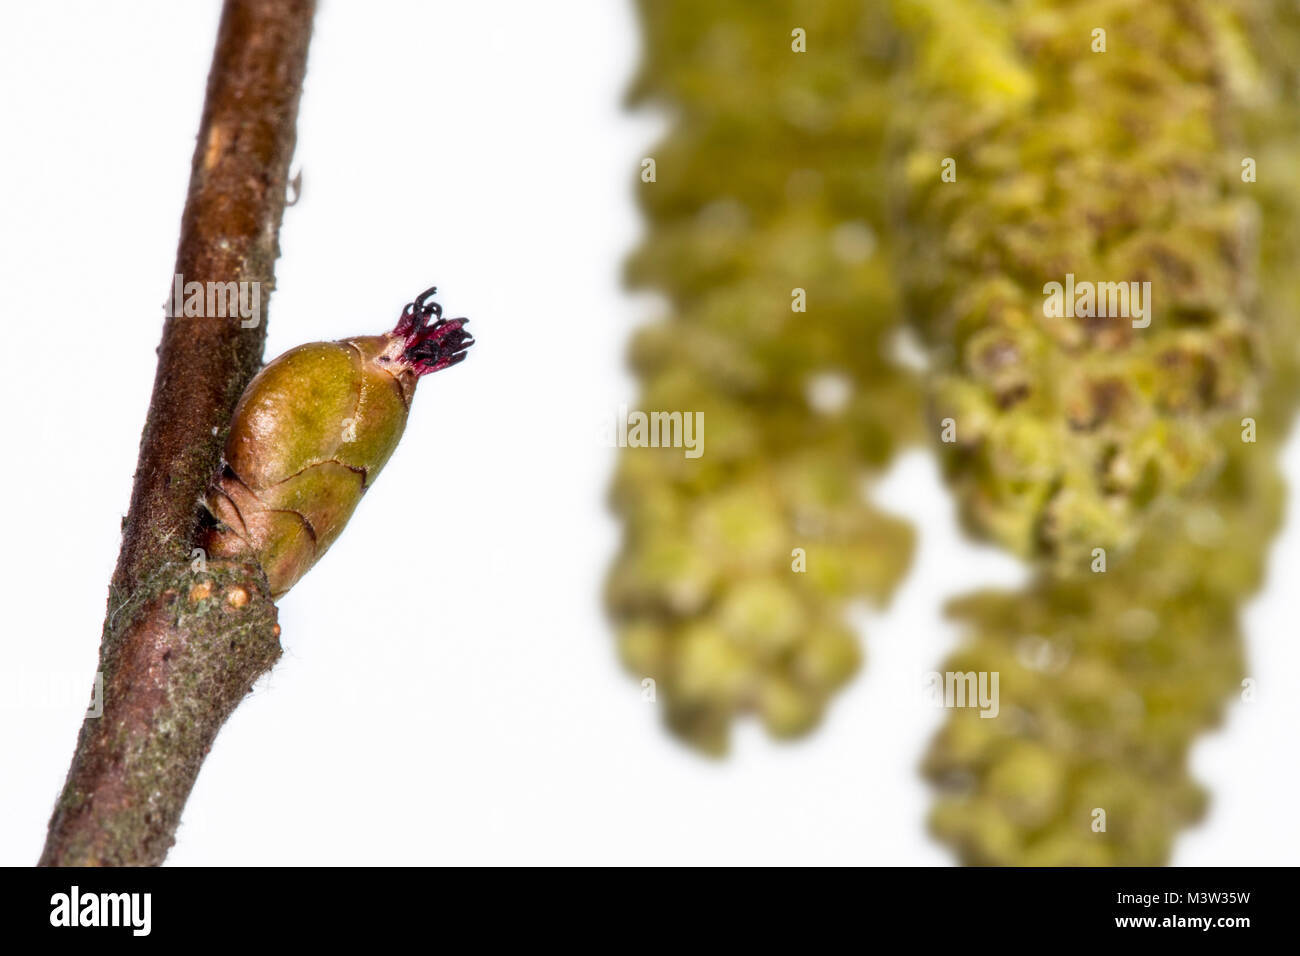 Common hazel (Corylus avellana) close up of female catkin concealed in bud with only the red  styles visible against white background Stock Photo